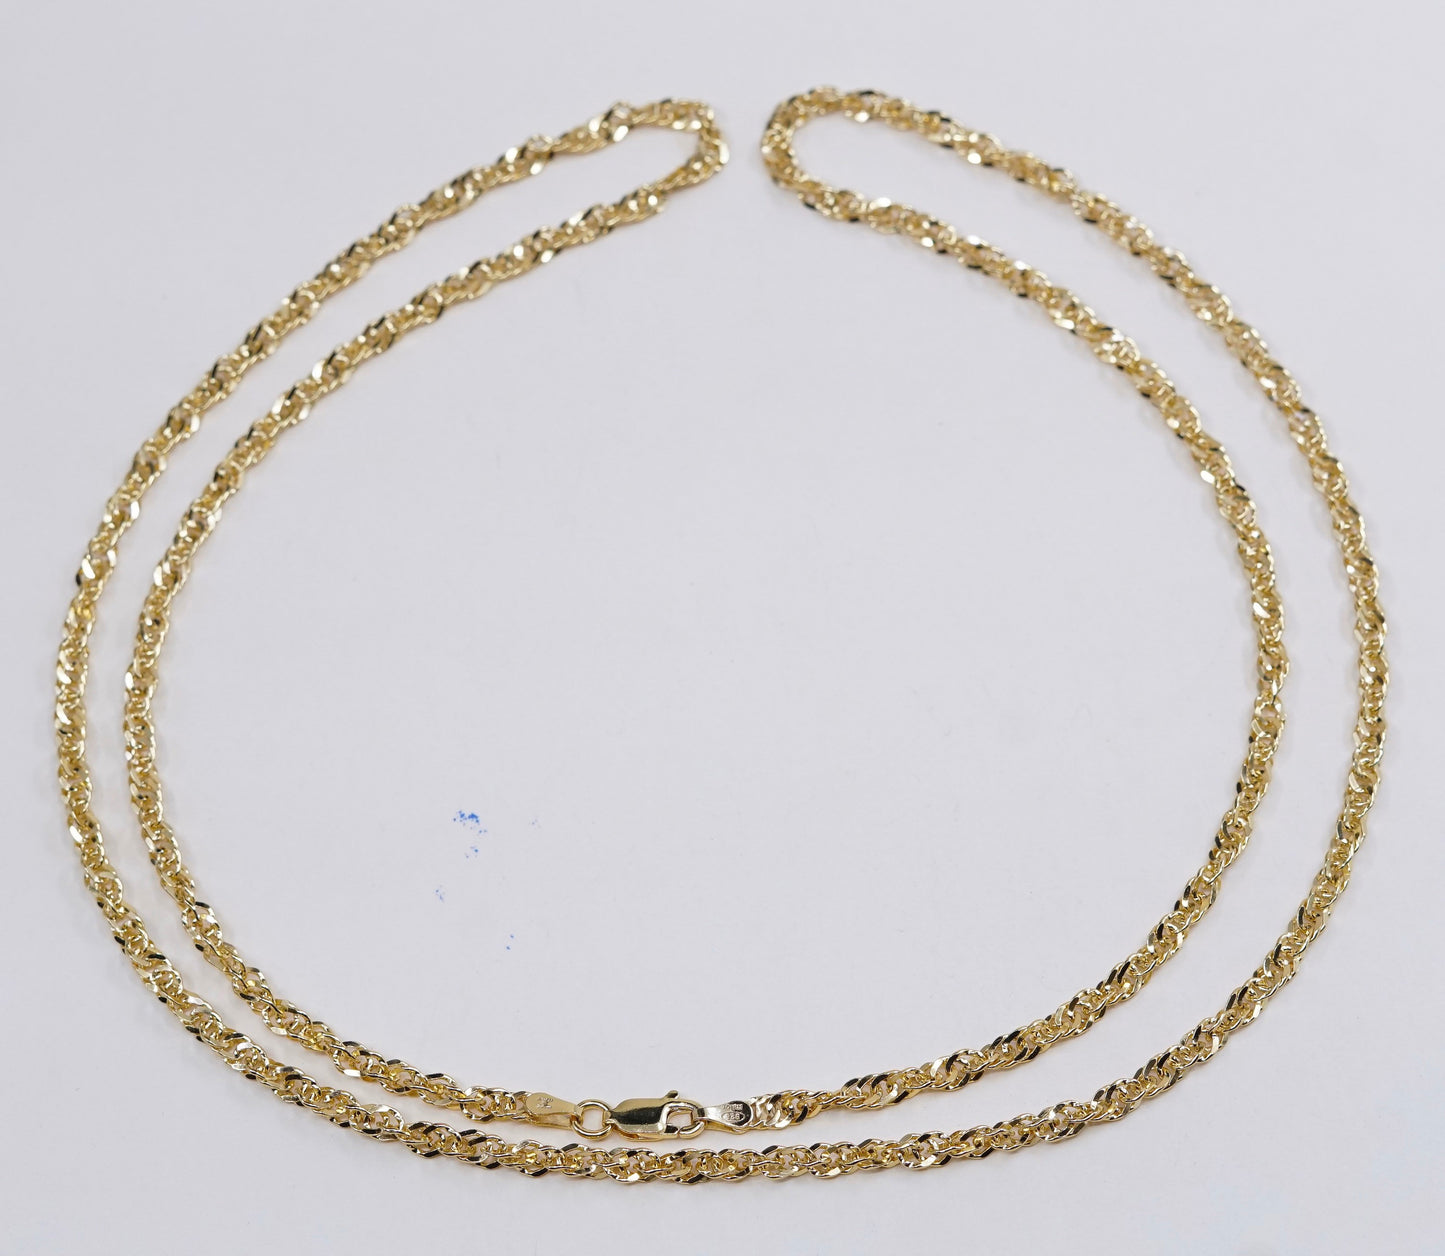 30”, 3mm, Milor vermeil gold sterling silver Italy 925 singapore chain necklace